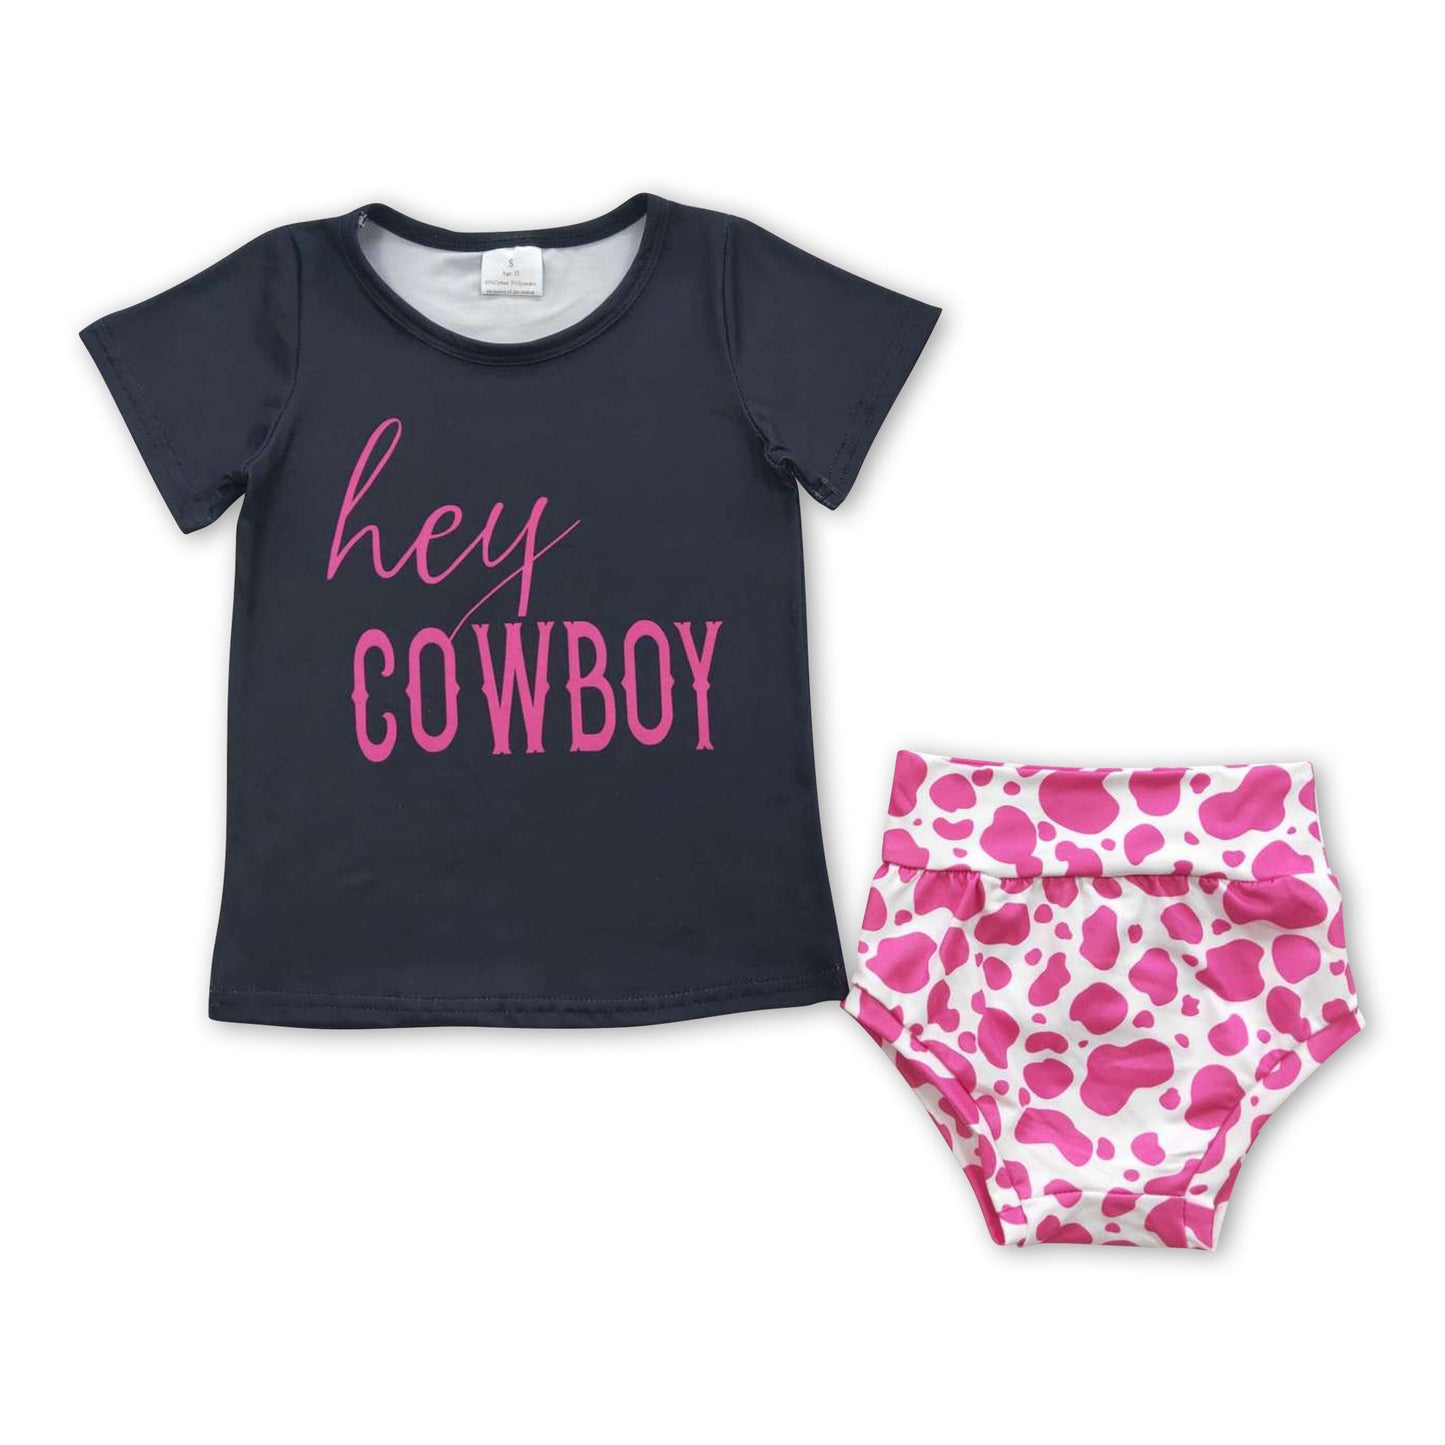 Hey cowboy shirt pink bummies western baby outfits